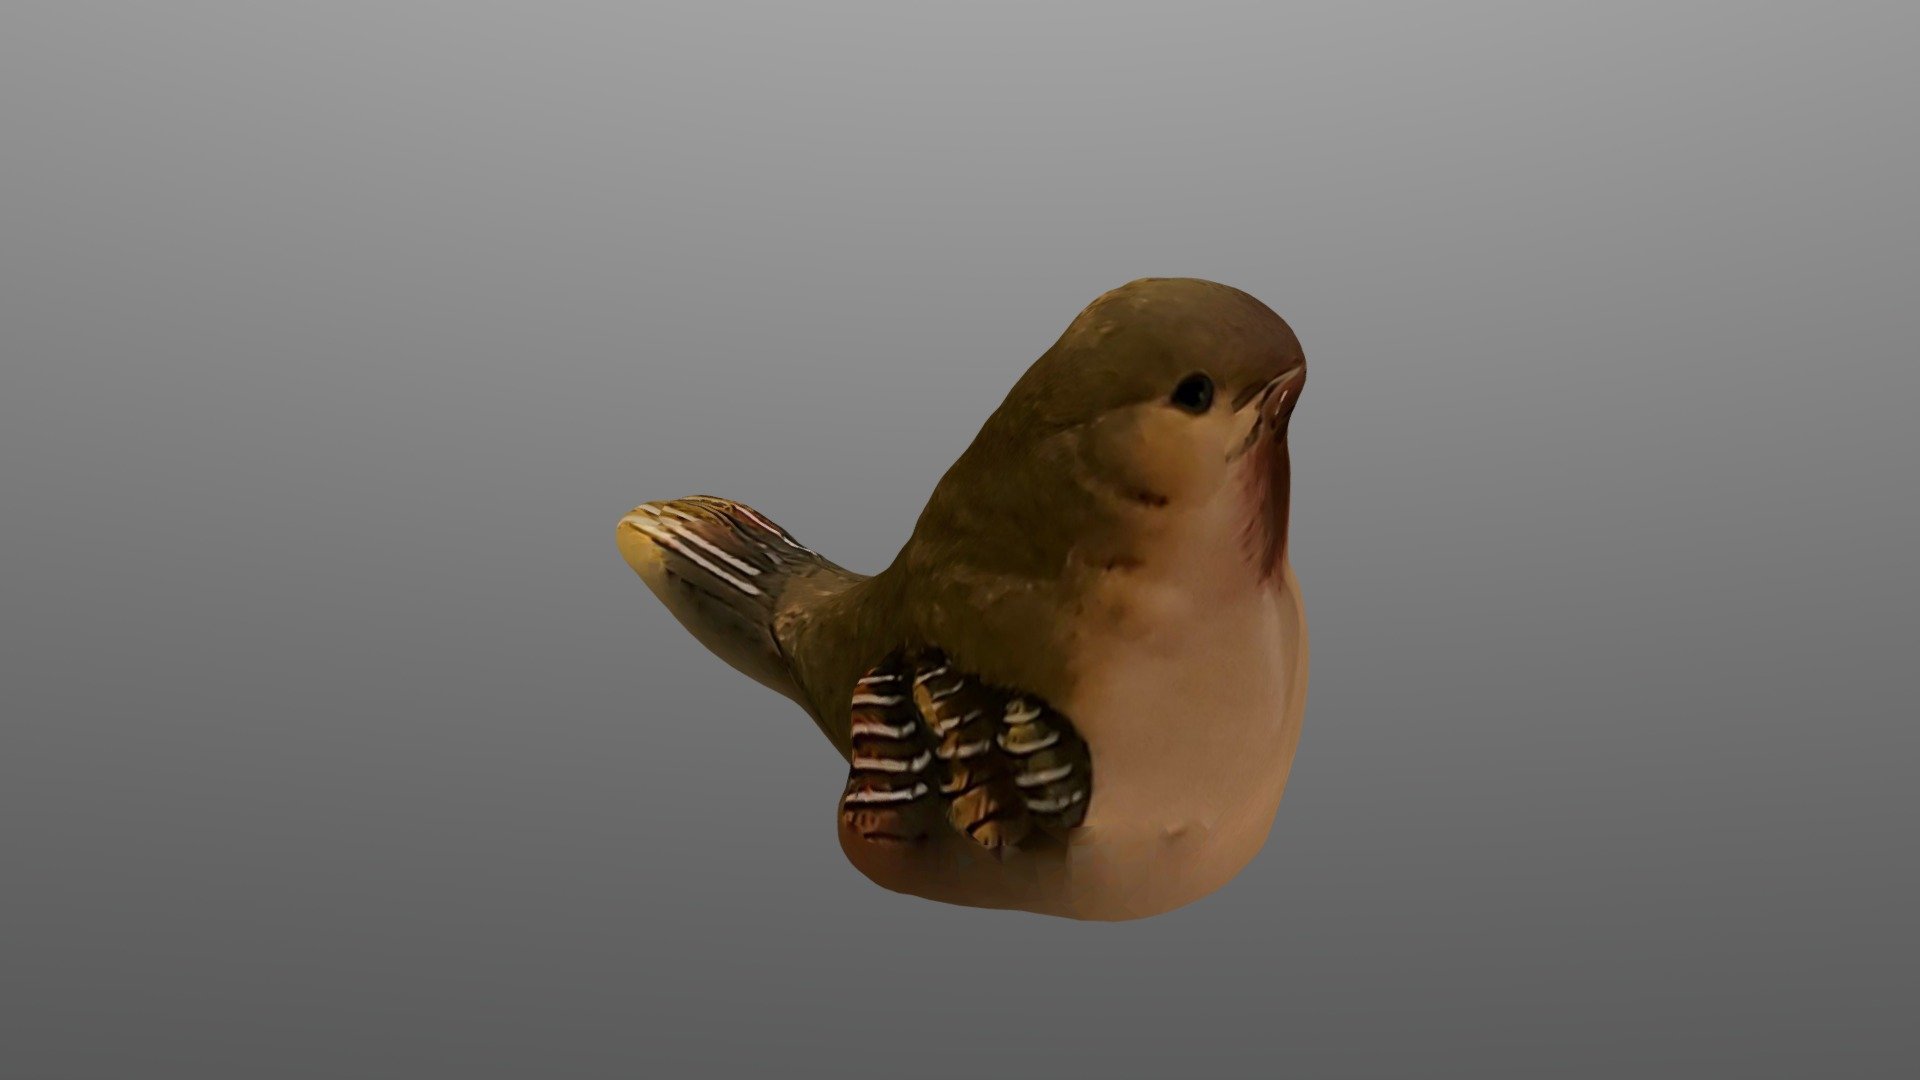 3D Bird Model purchased from US